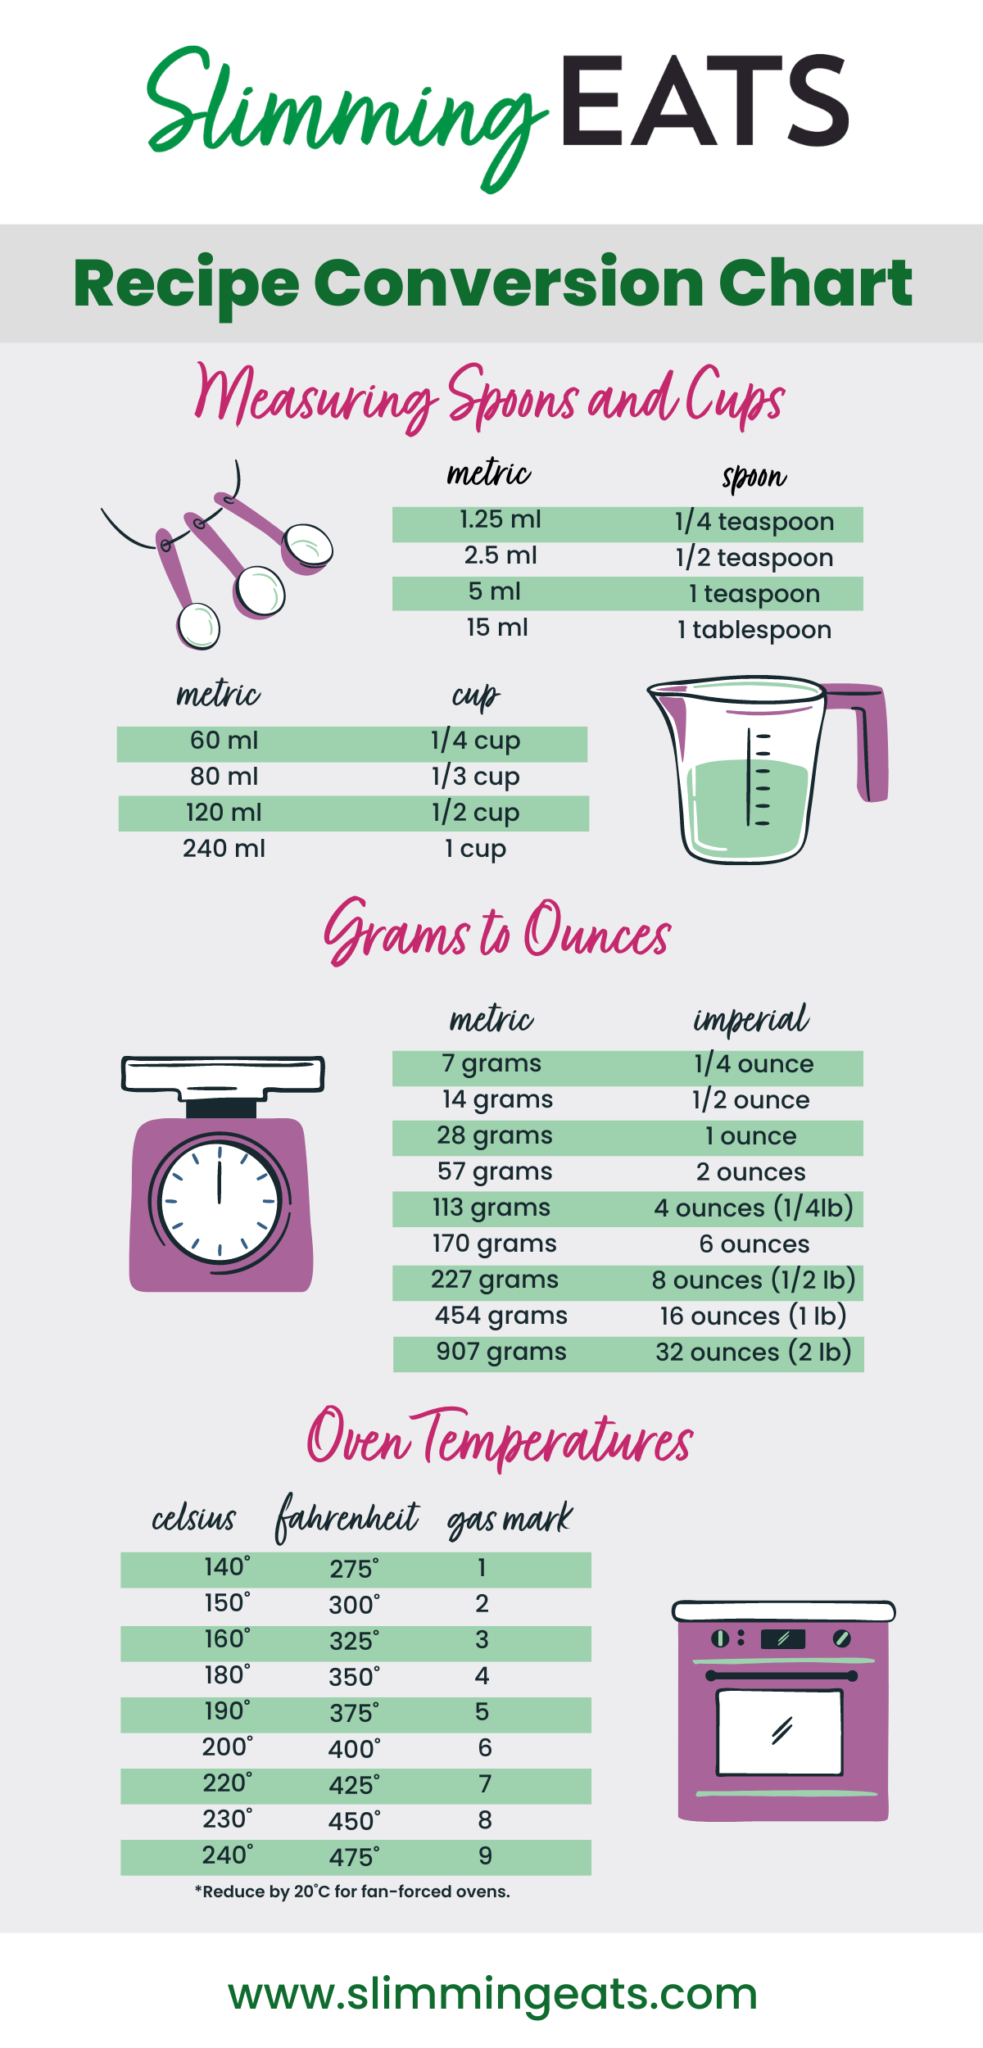 Basic Cooking Conversions and Measurements for Recipes